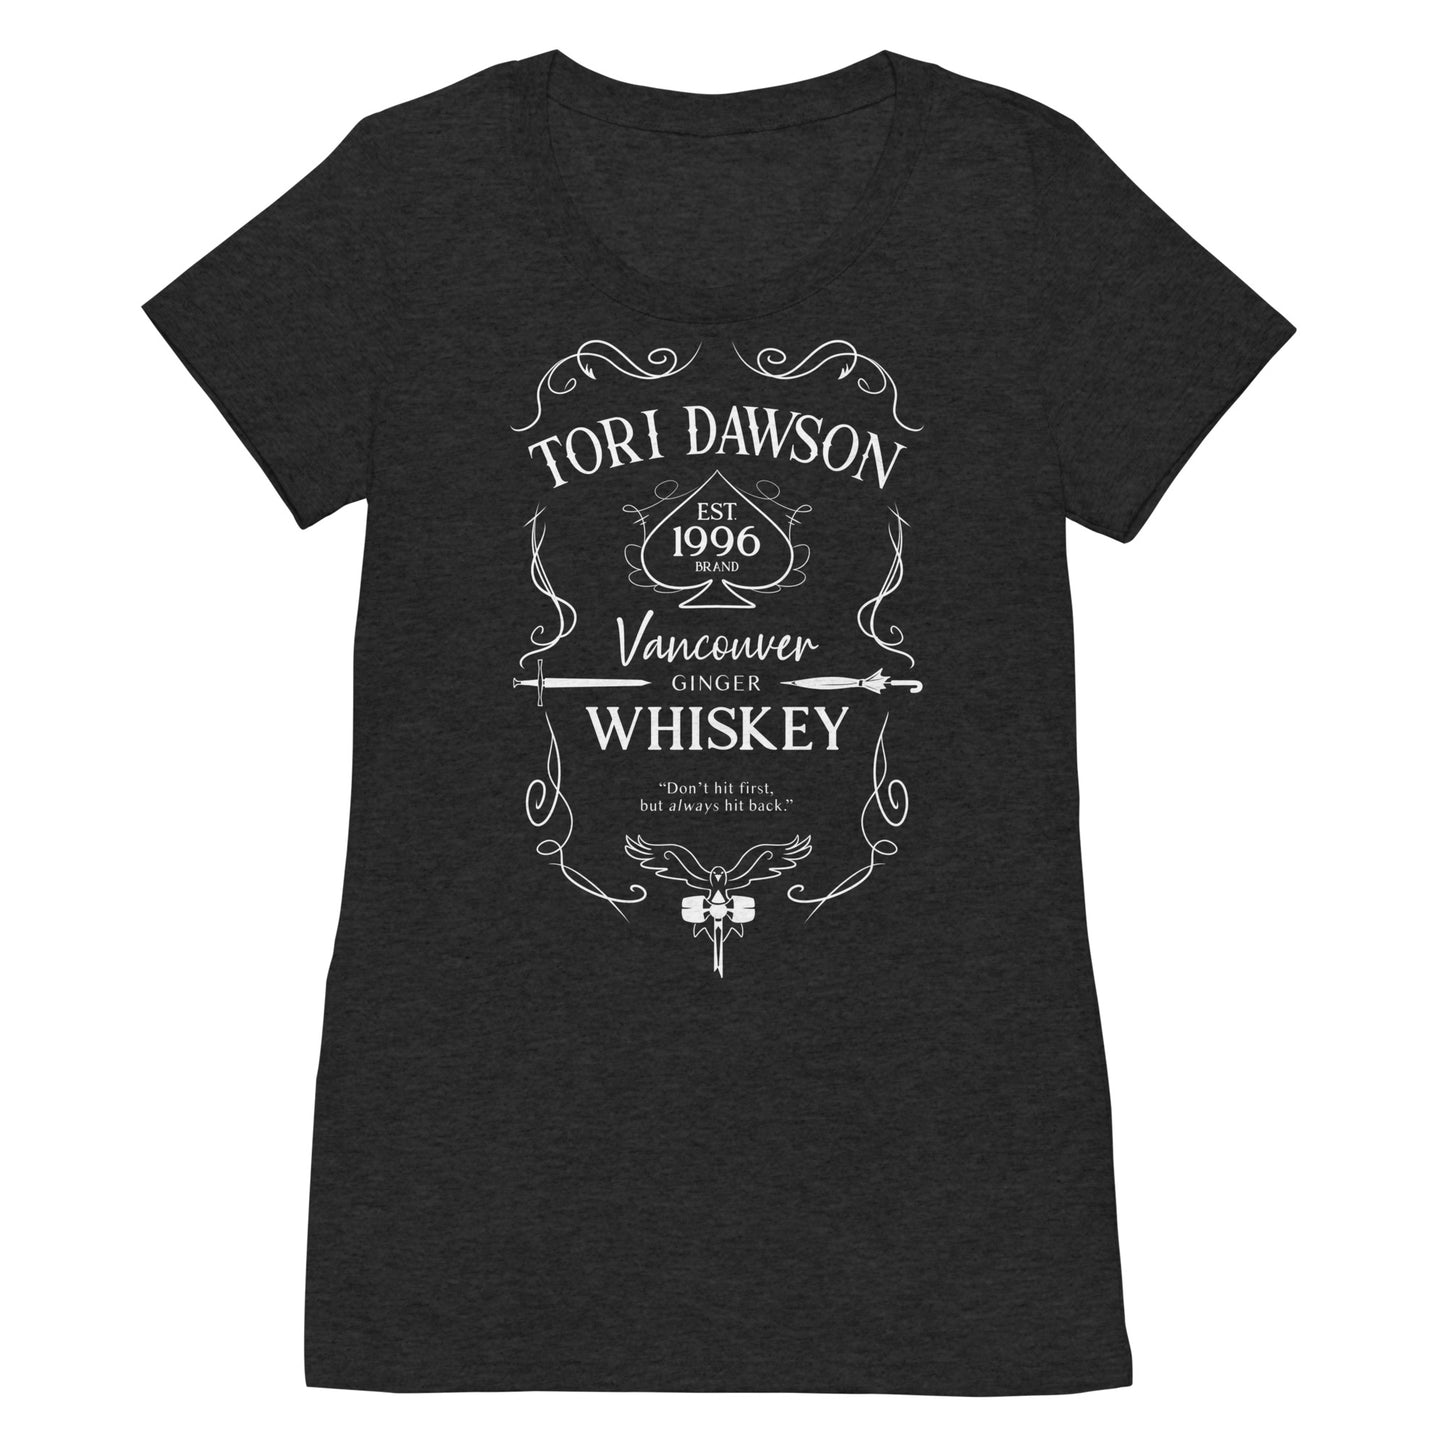 "Ginger Whiskey" Ladies' Fitted T-shirt (The Guild Codex)